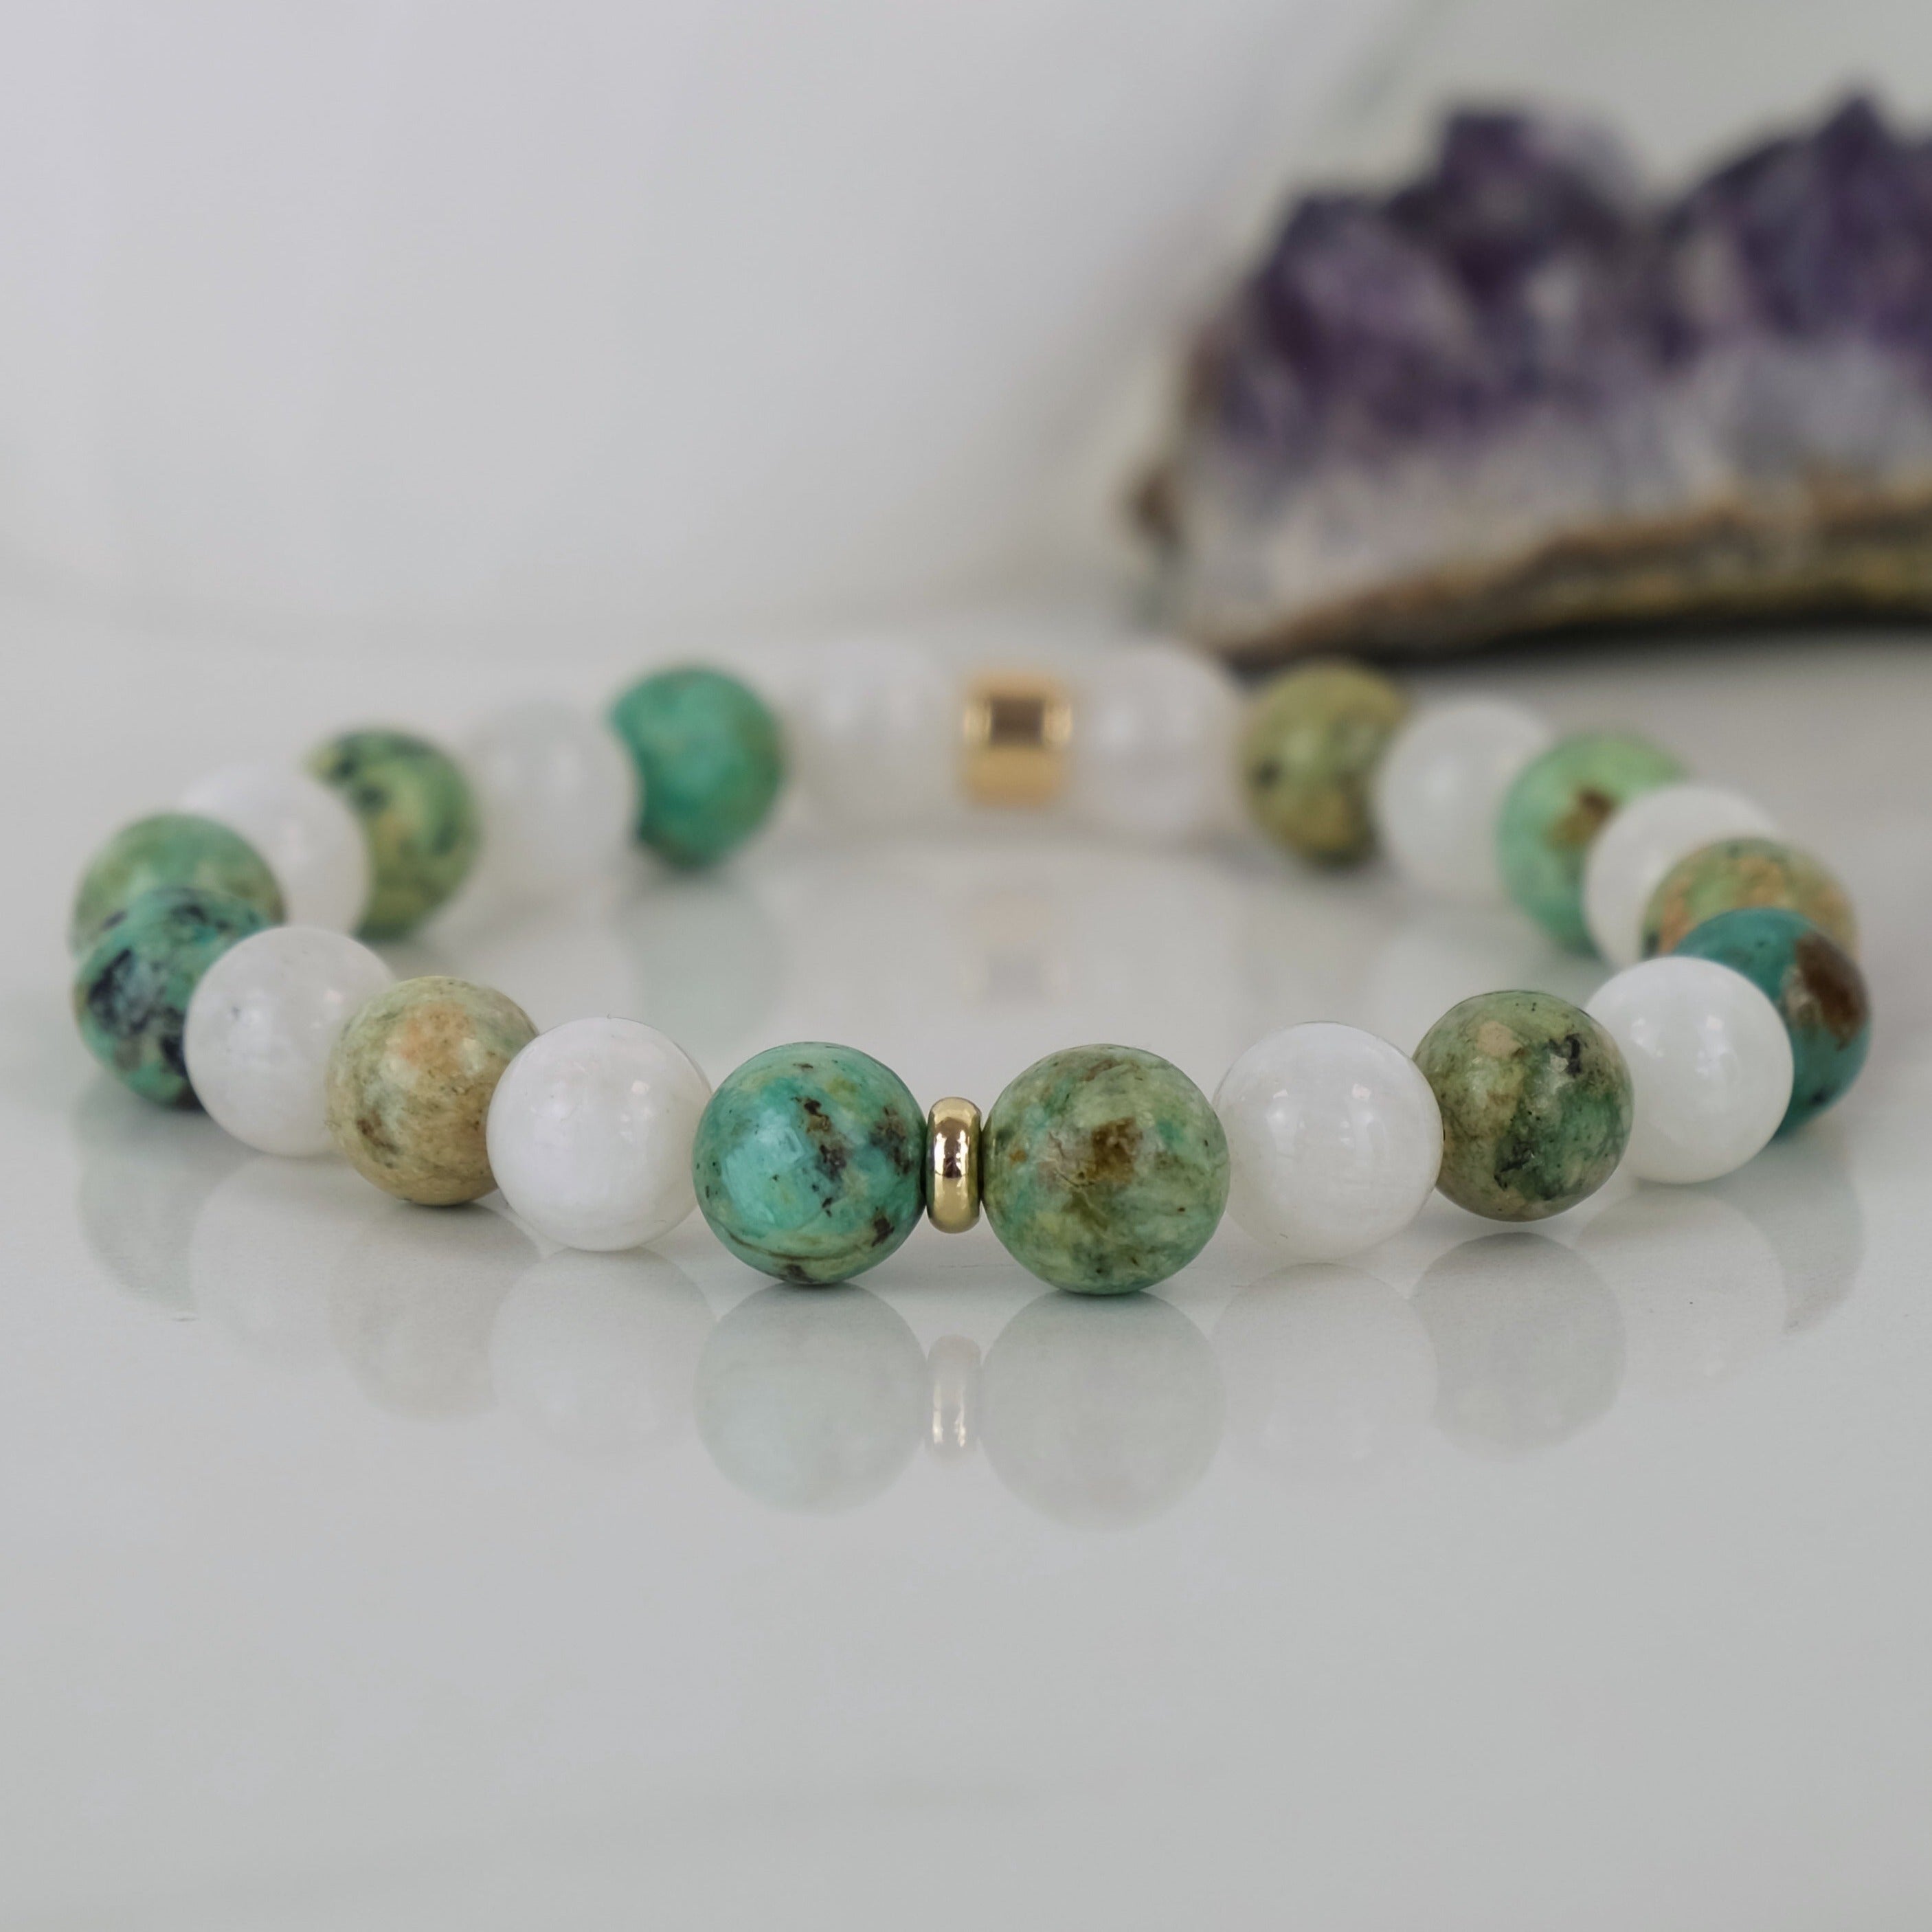 A moonstone and chrysocolla gemstone bracelet with gold accessories